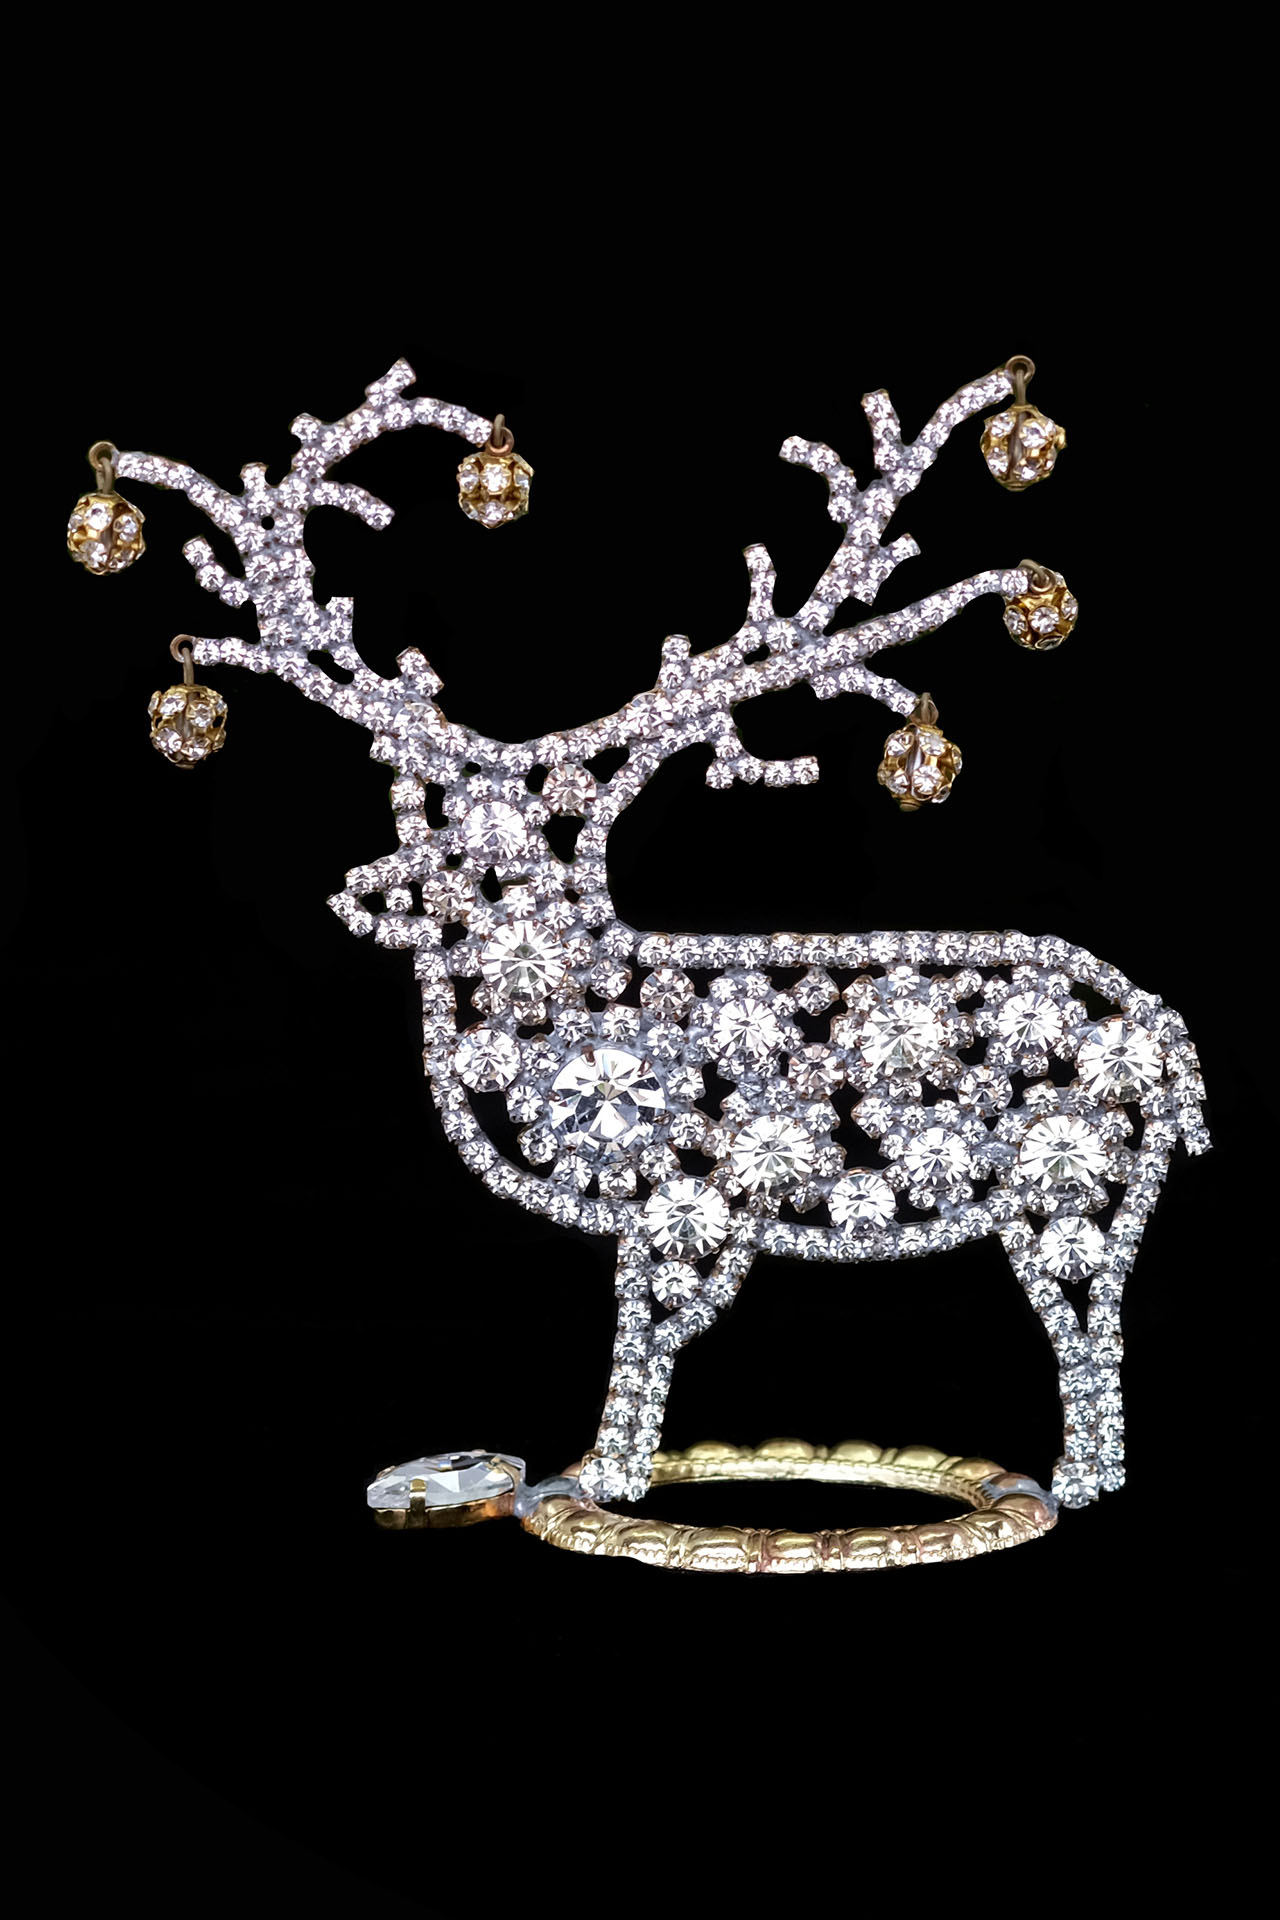 Reindeer with adorensed antlers - decoration for christmas